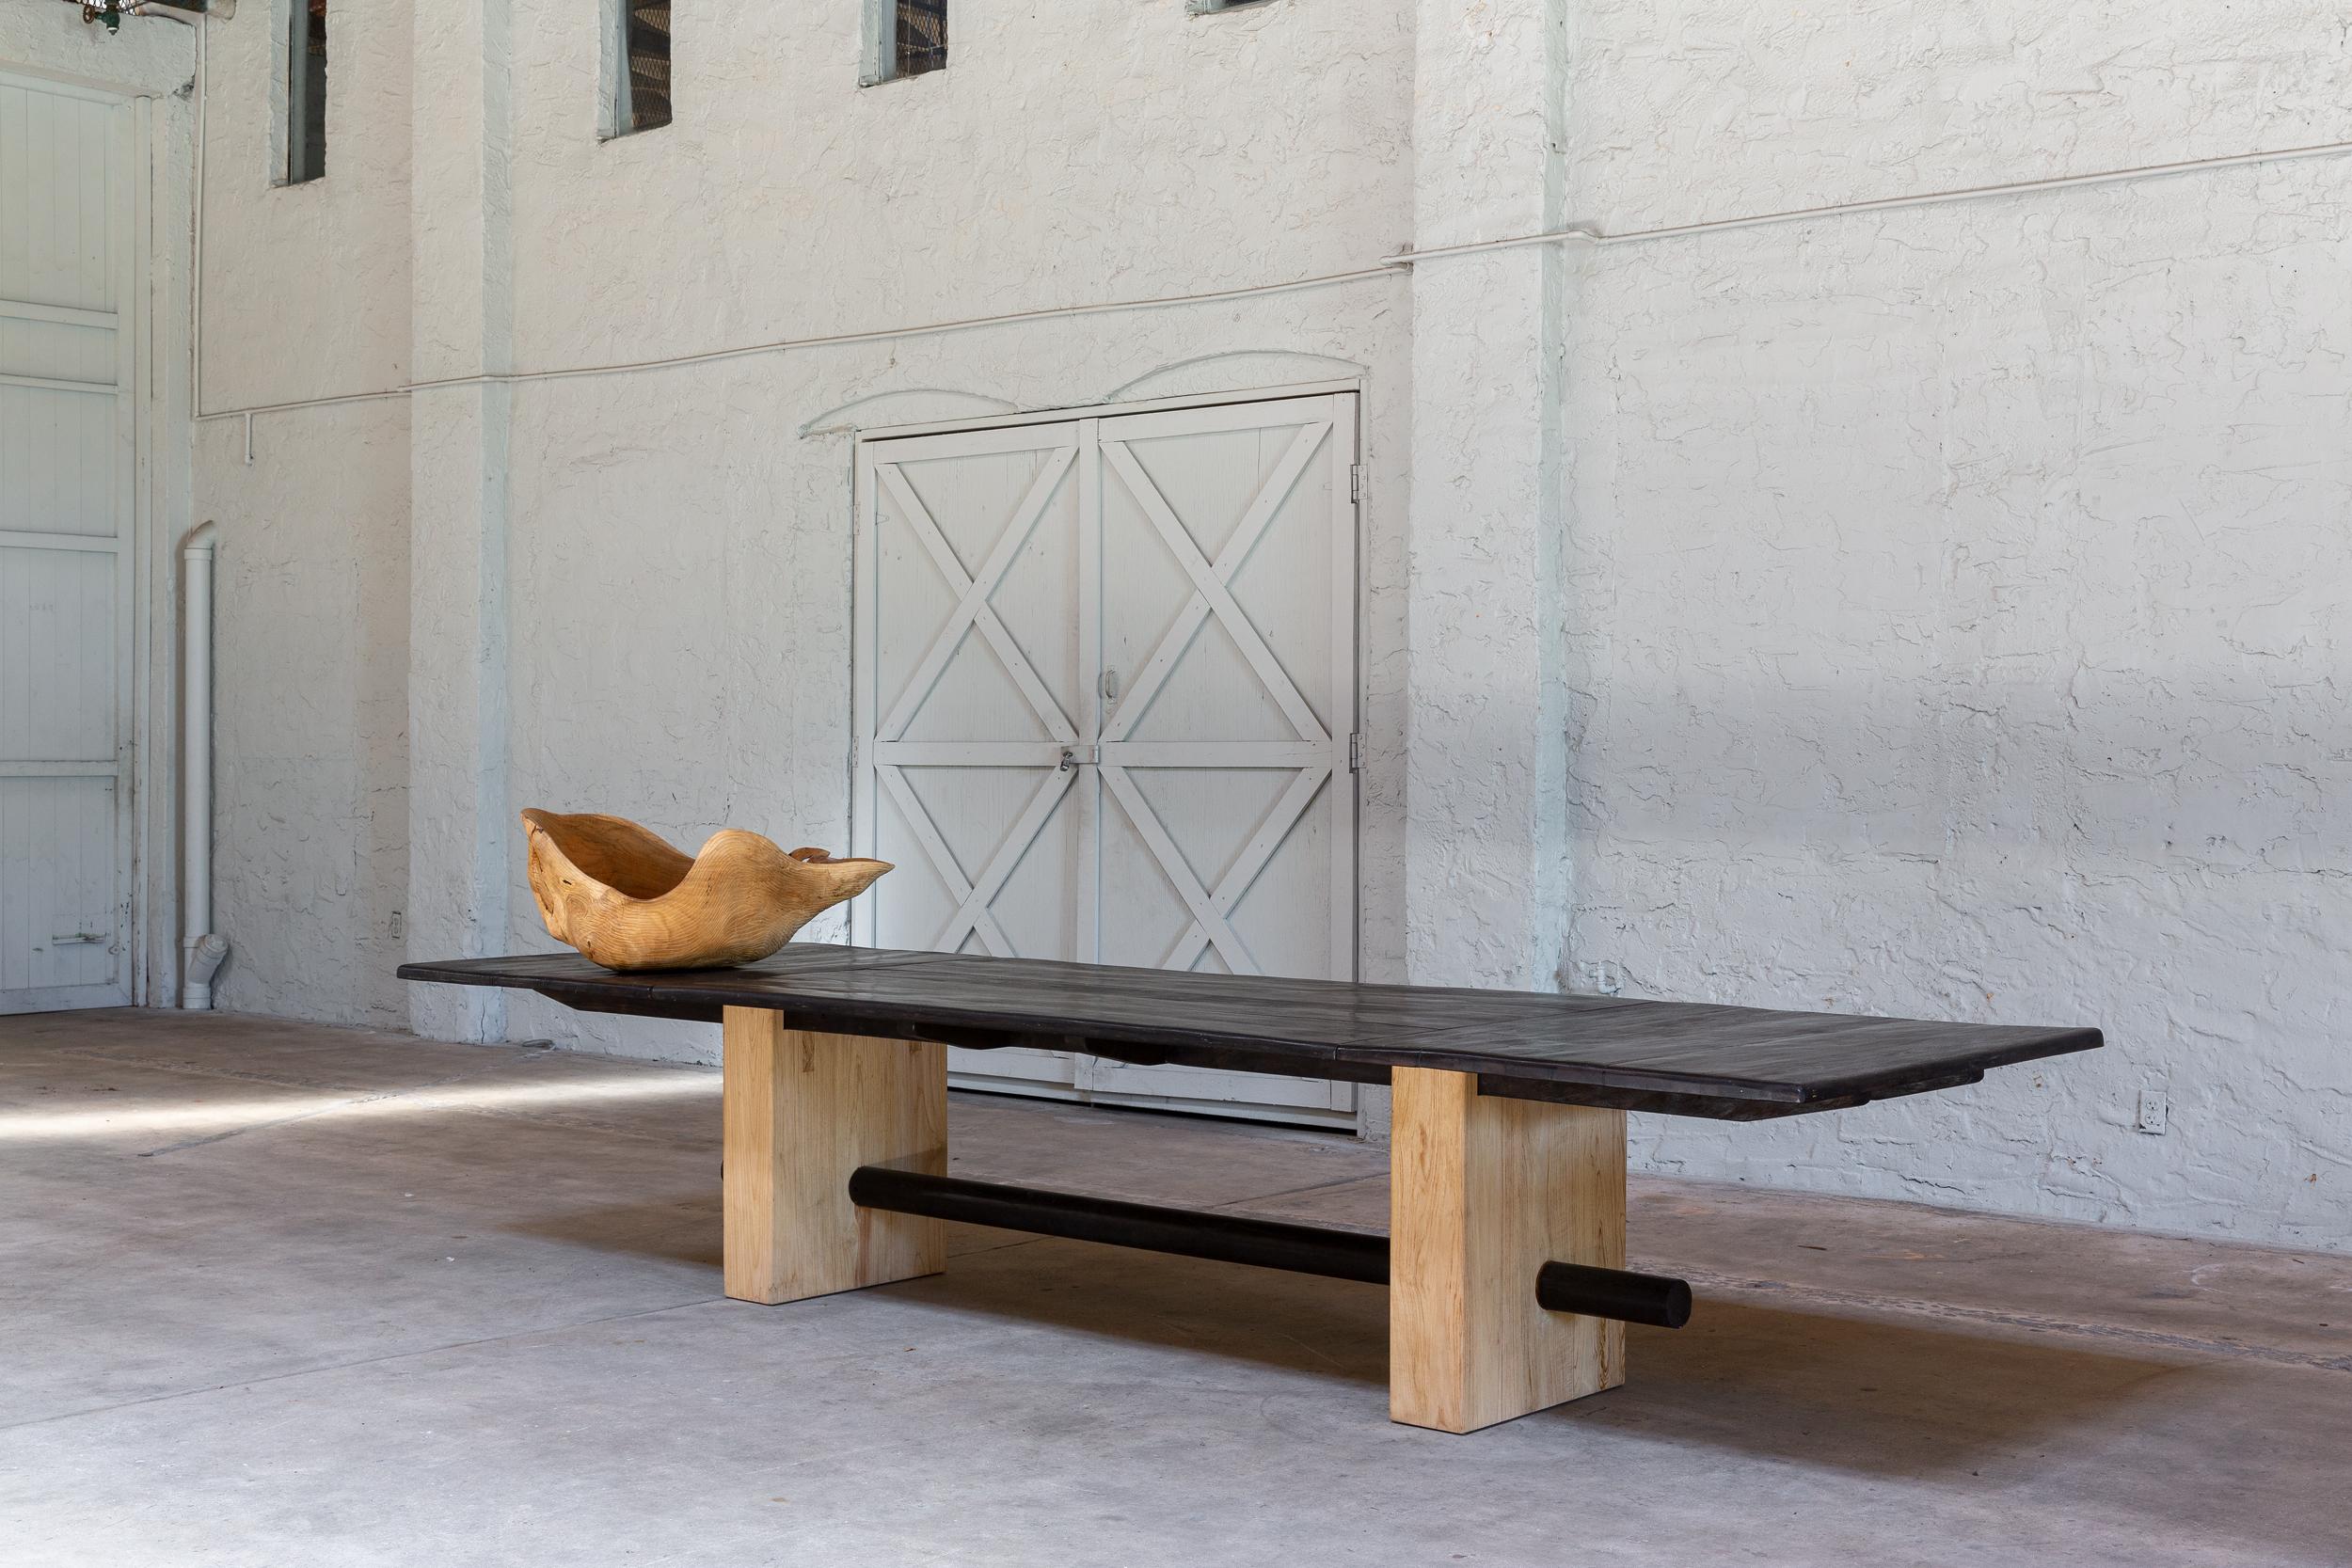 Balinese Modern Porto Dining Table by CEU Studio, Represented by Tuleste Factory For Sale